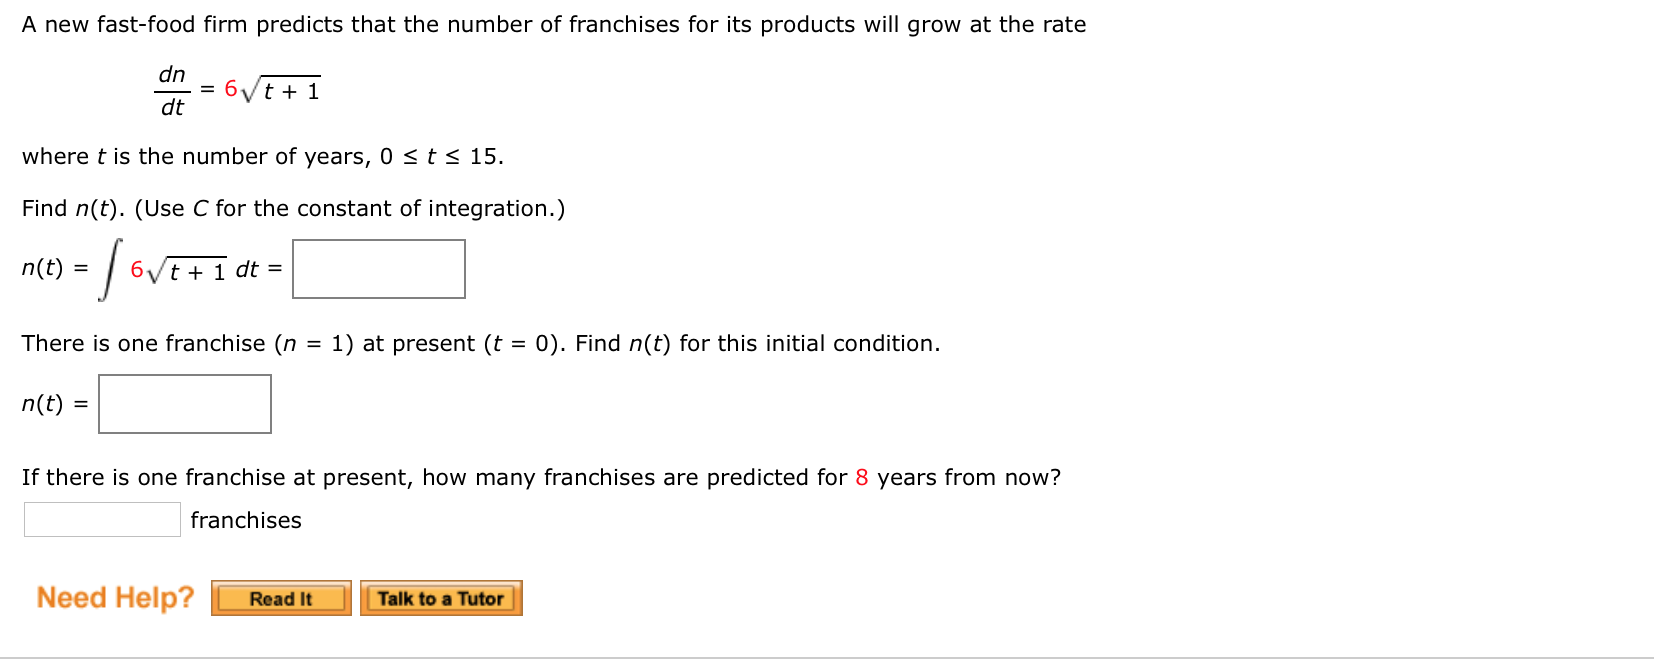 A new fast-food firm predicts that the number of franchises for its products will grow at the rate
dn
6/t + 1
dt
where t is the number of years, 0 <t< 15.
Find n(t). (Use C for the constant of integration.)
n(t) :
6/t + 1 dt =
%3D
There is one franchise (n
1) at present (t = 0). Find n(t) for this initial condition.
%3D
n(t) =
If there is one franchise at present, how many franchises are predicted for 8 years from now?
franchises
